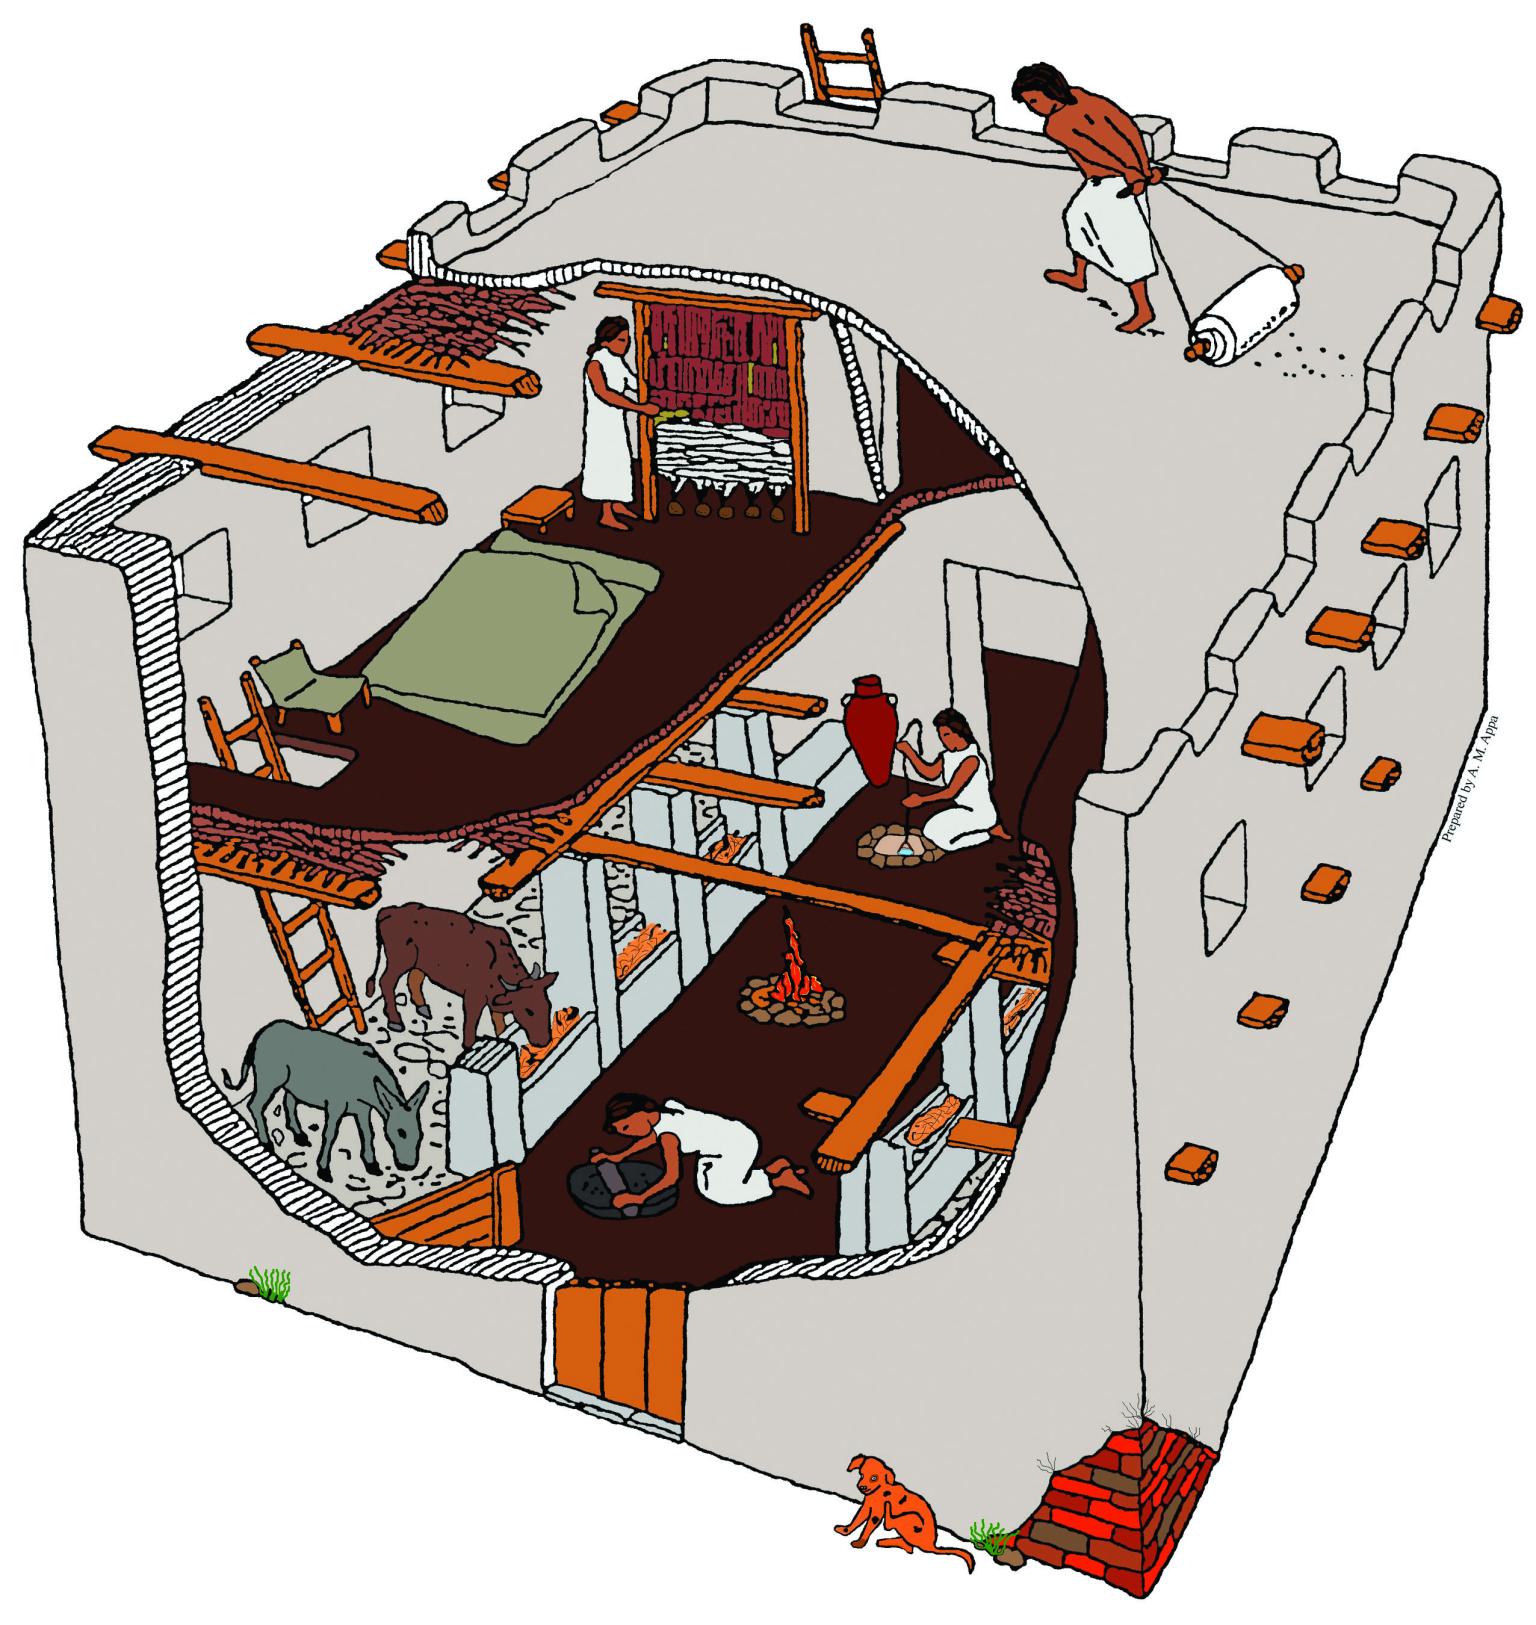 Cut-away drawing of house interior with two stories consisting of an upper bedroom, and animal stalls and cooking areas on bottom floor.